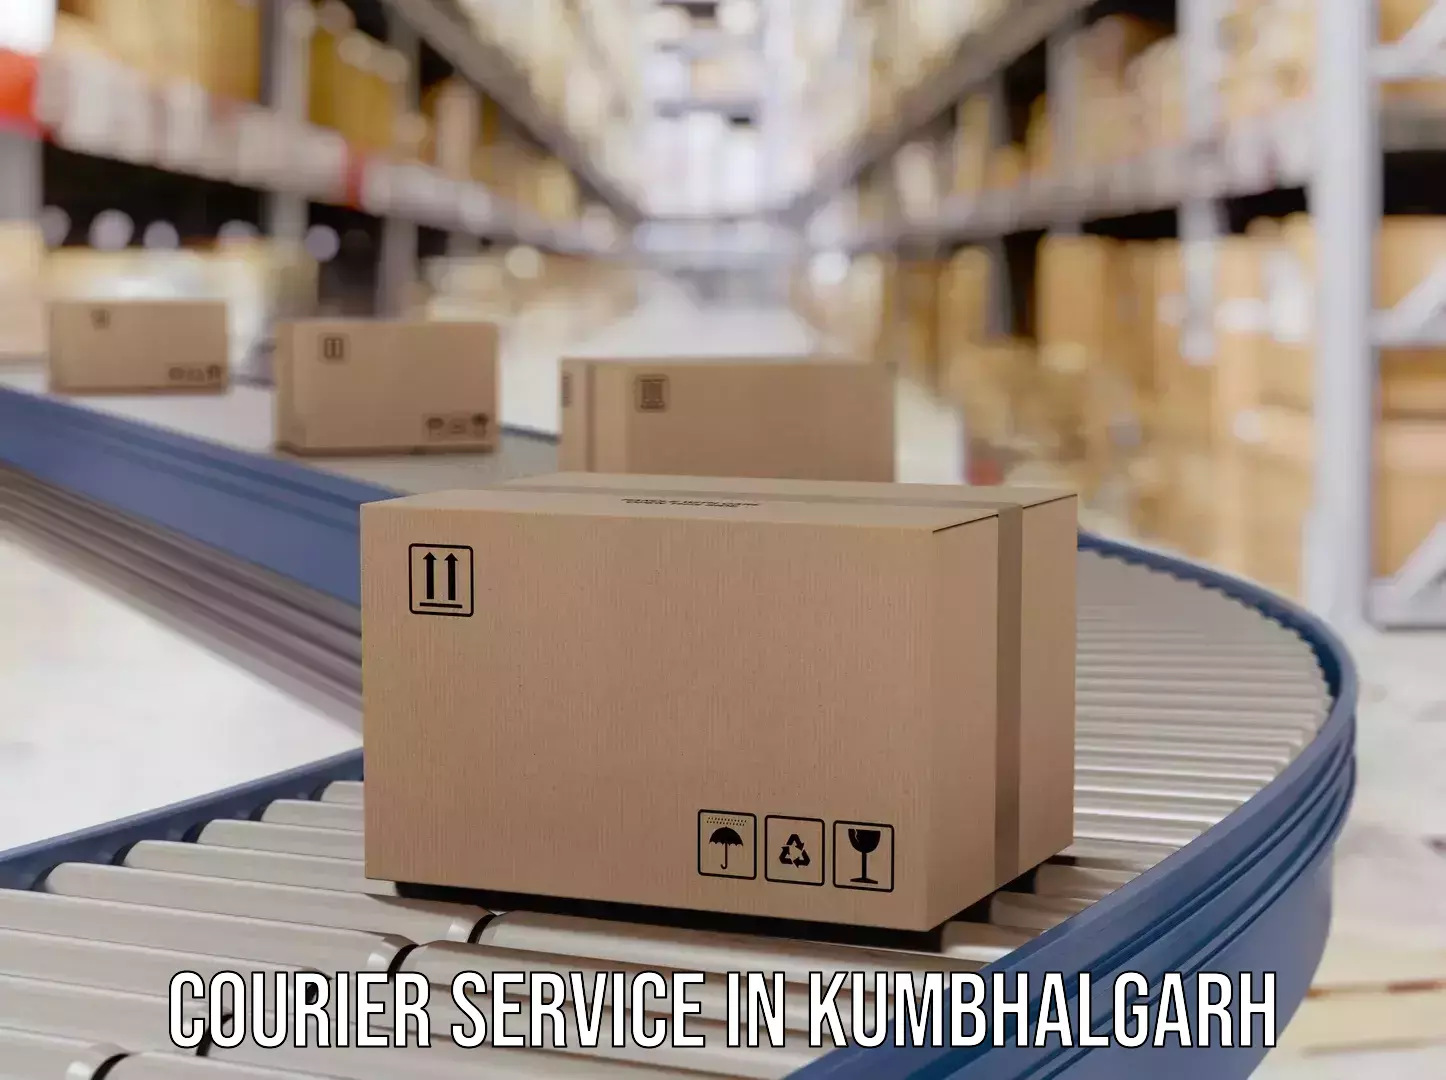 Fastest parcel delivery in Kumbhalgarh